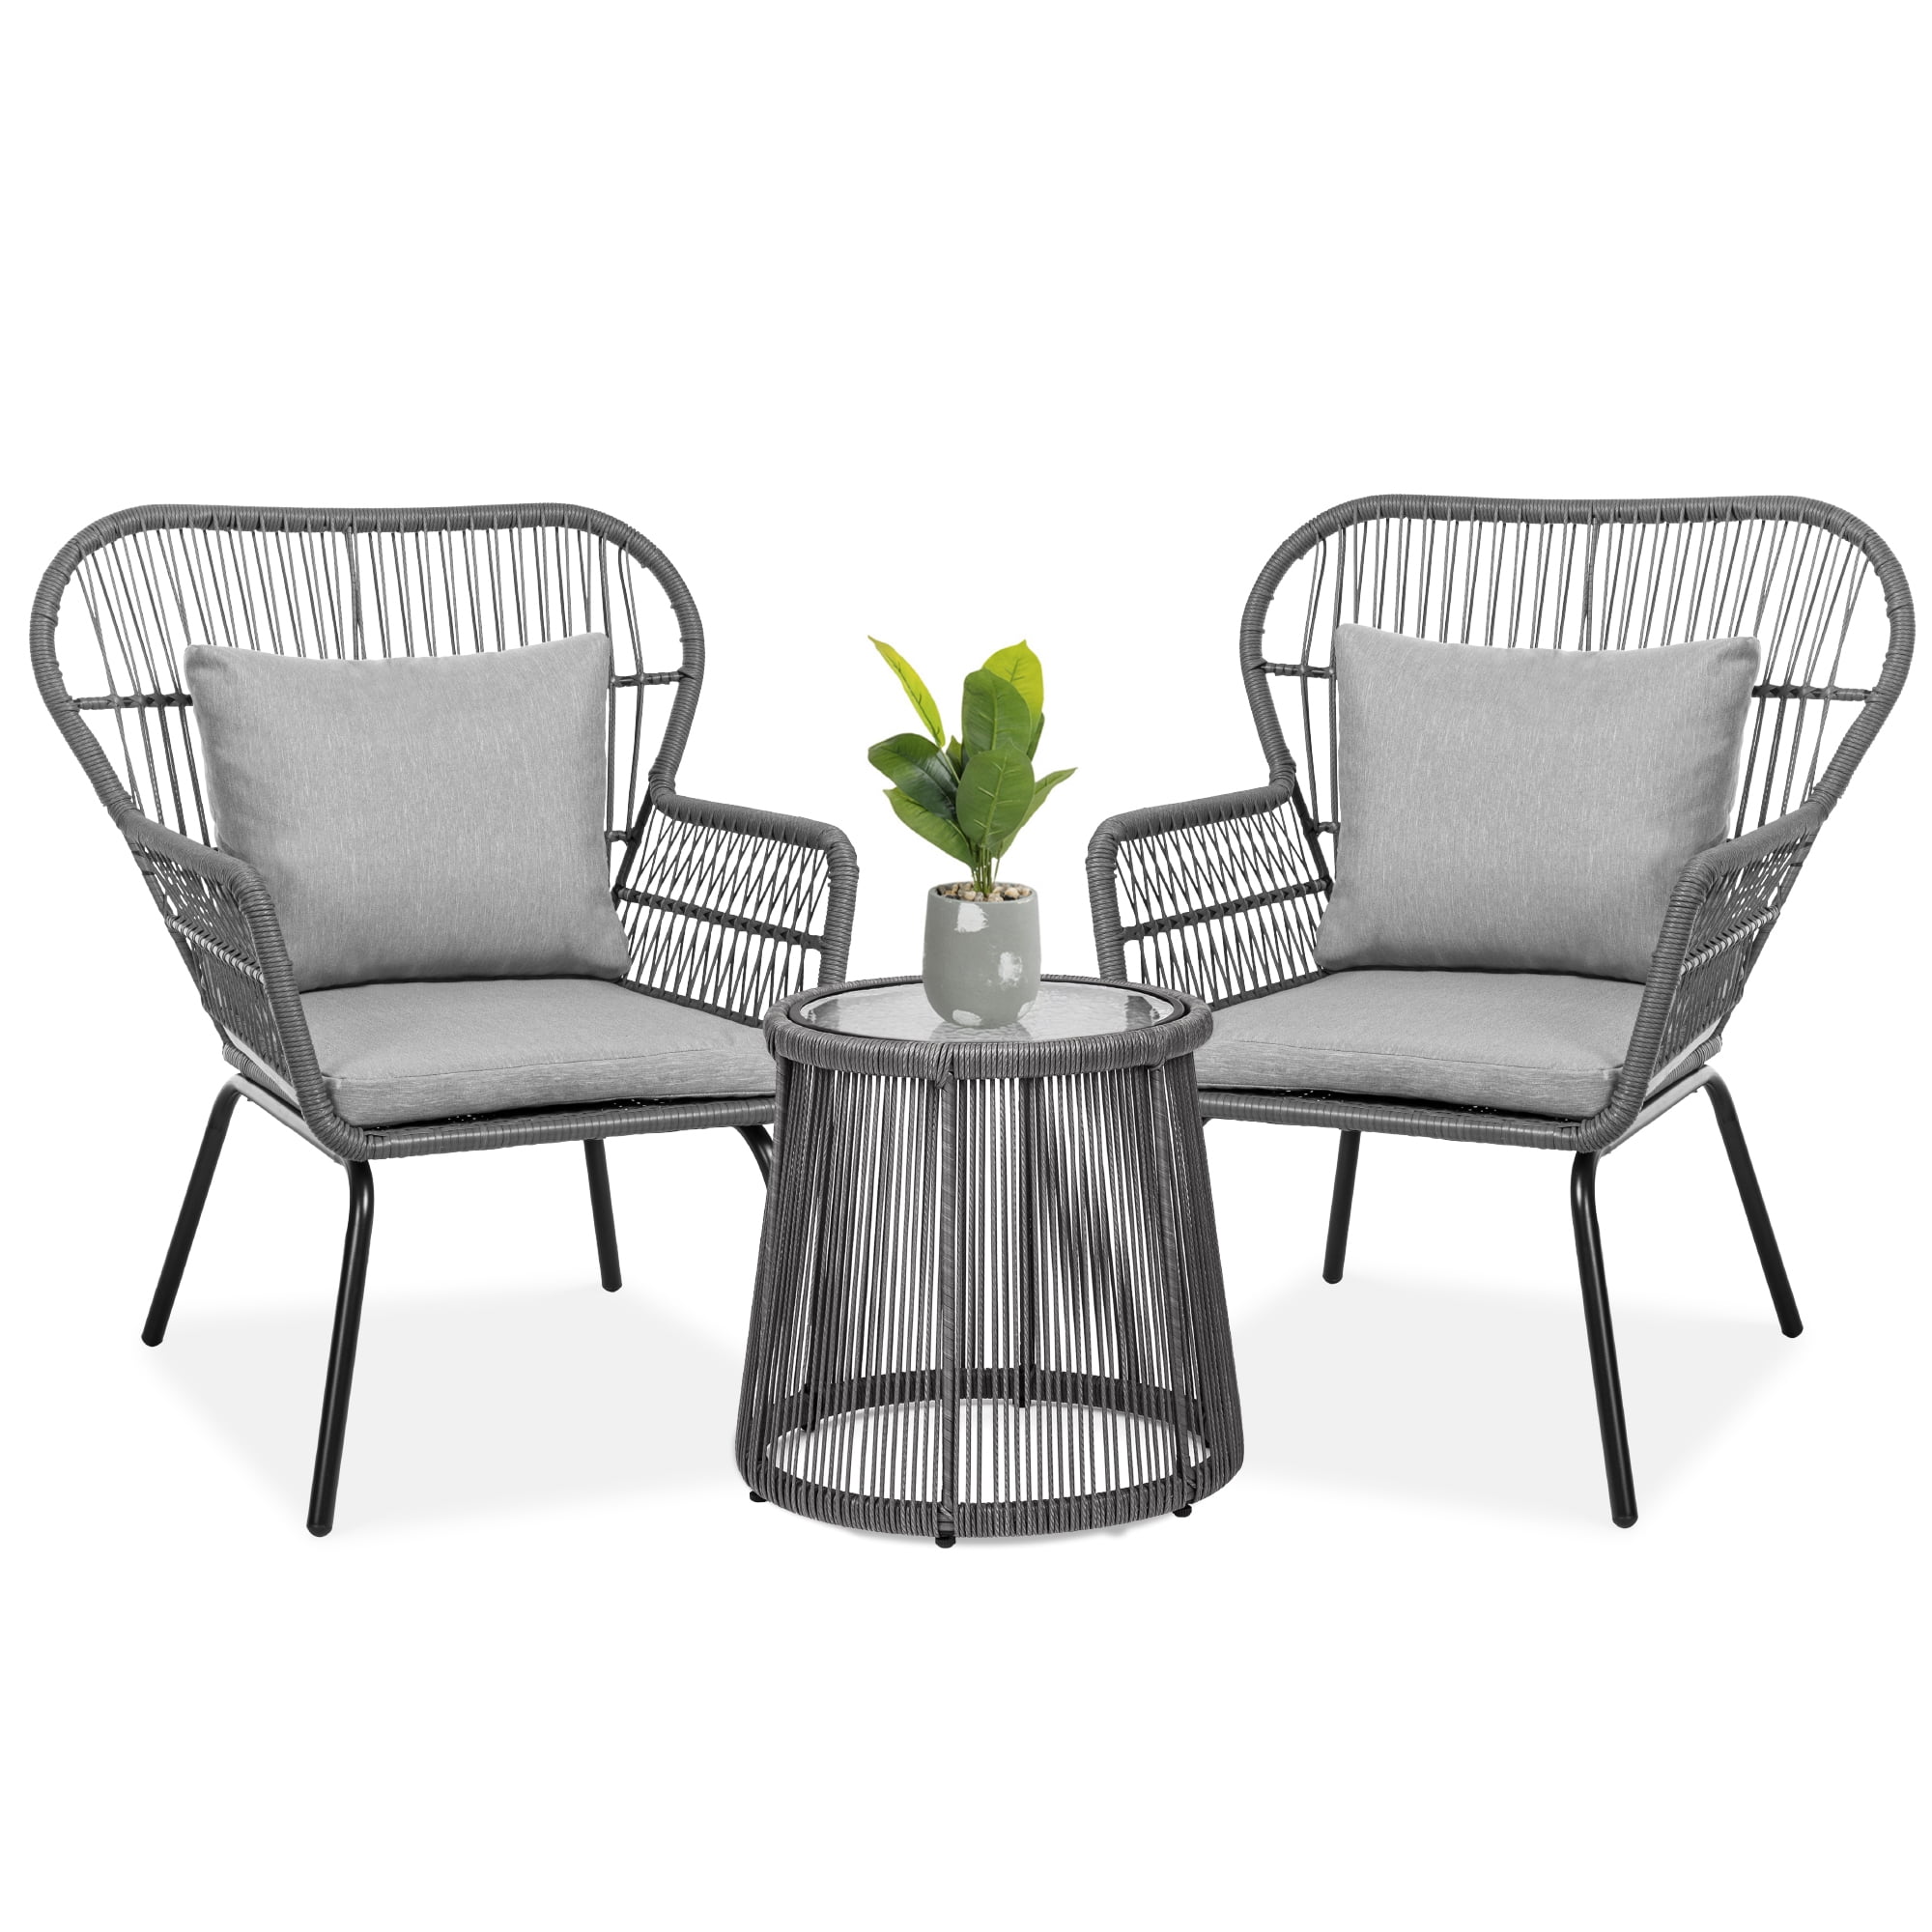 Patio Furniture for Yard Garden w/ 2 Chairs 2 Cushions Side Storage Table Best Choice Products 3-Piece Outdoor Wicker Conversation Bistro Set Gray/Navy 